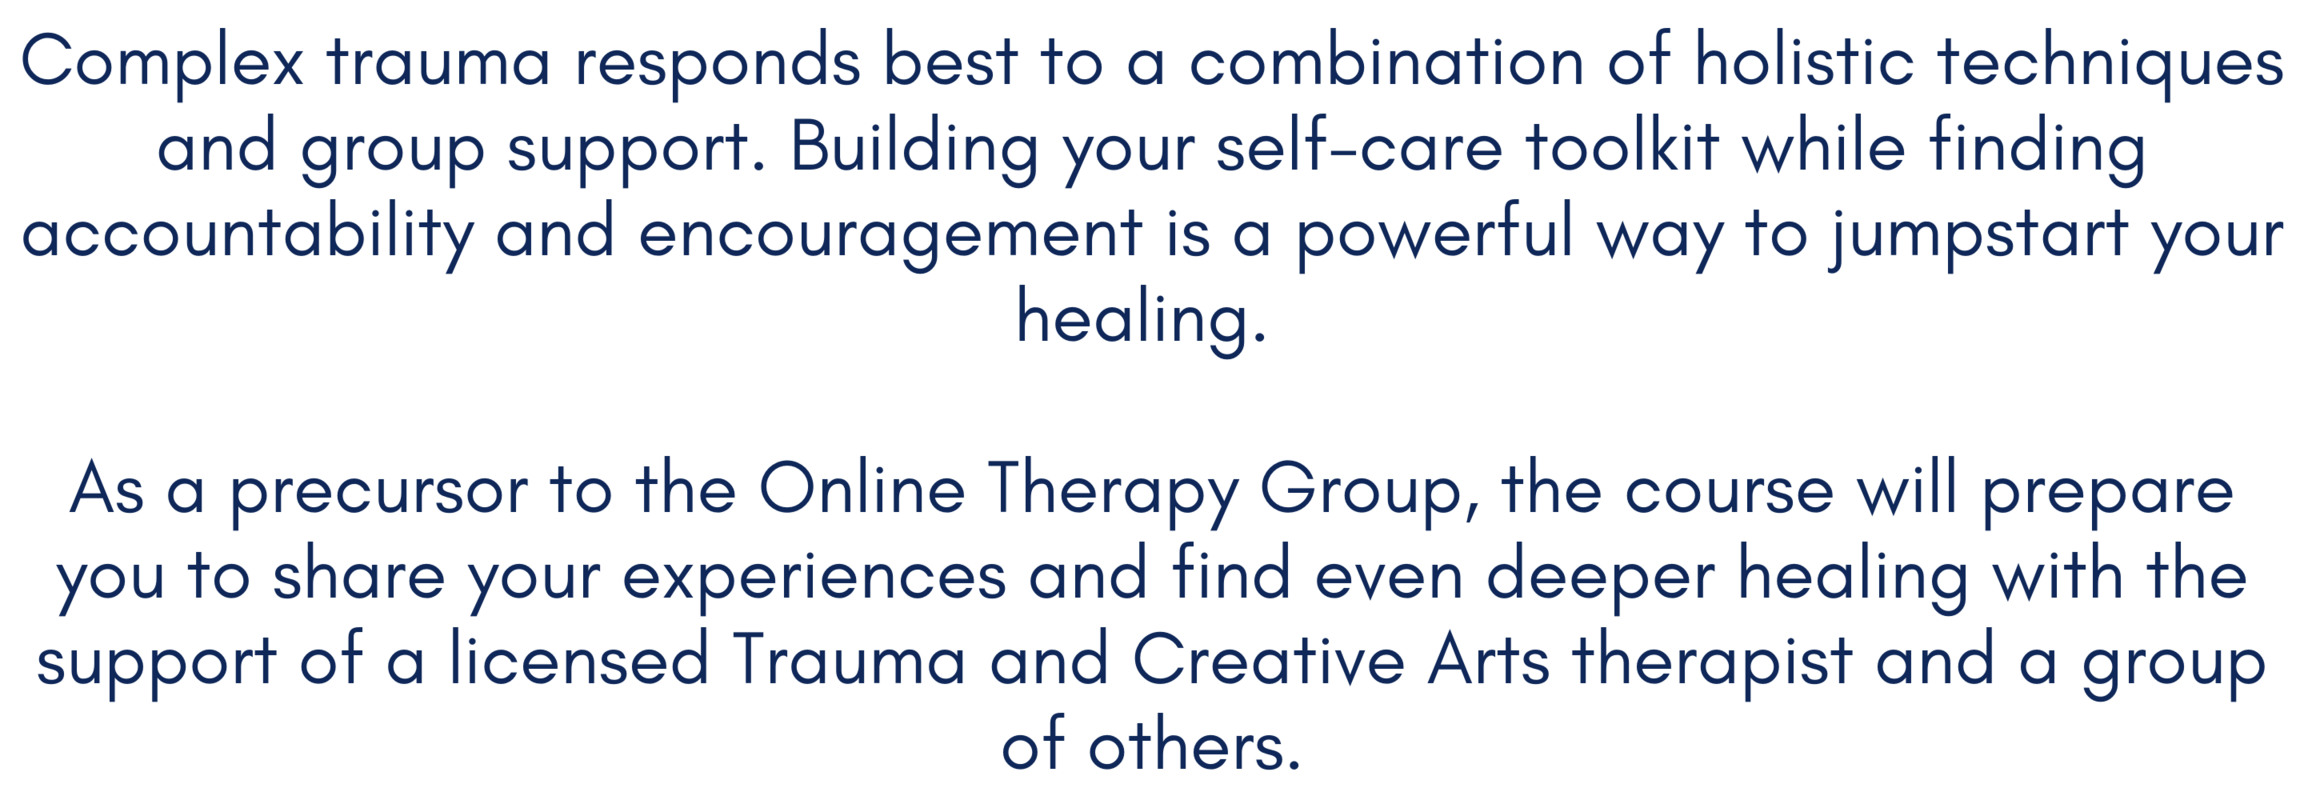 Complex trauma responds best to a combination of holistic techniques and group support. Building your self-care toolkit while finding accountability and encouragement is a powerful way to jumpstart your healing. 